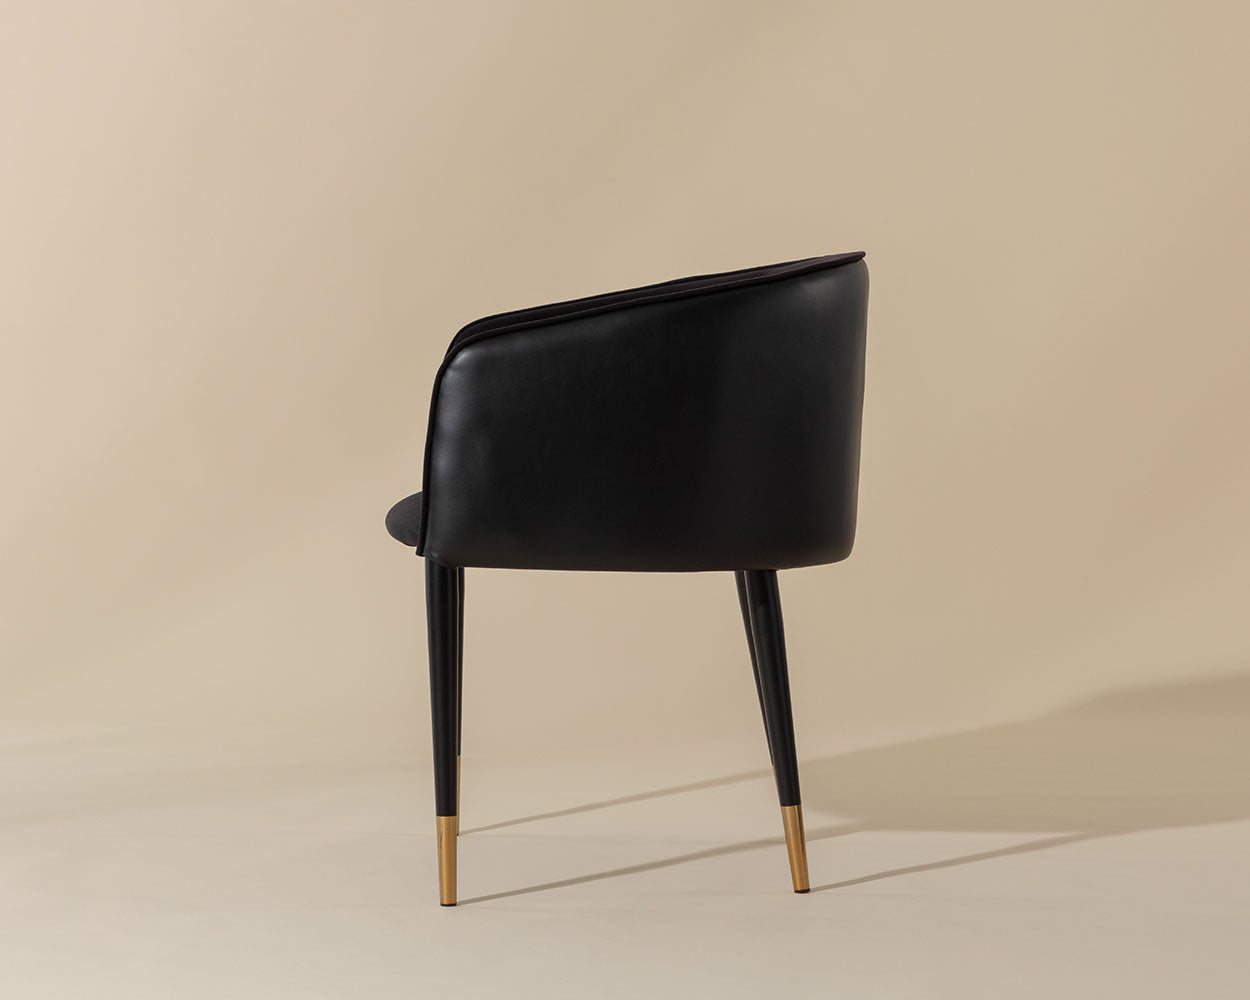 Asher Dining Armchair